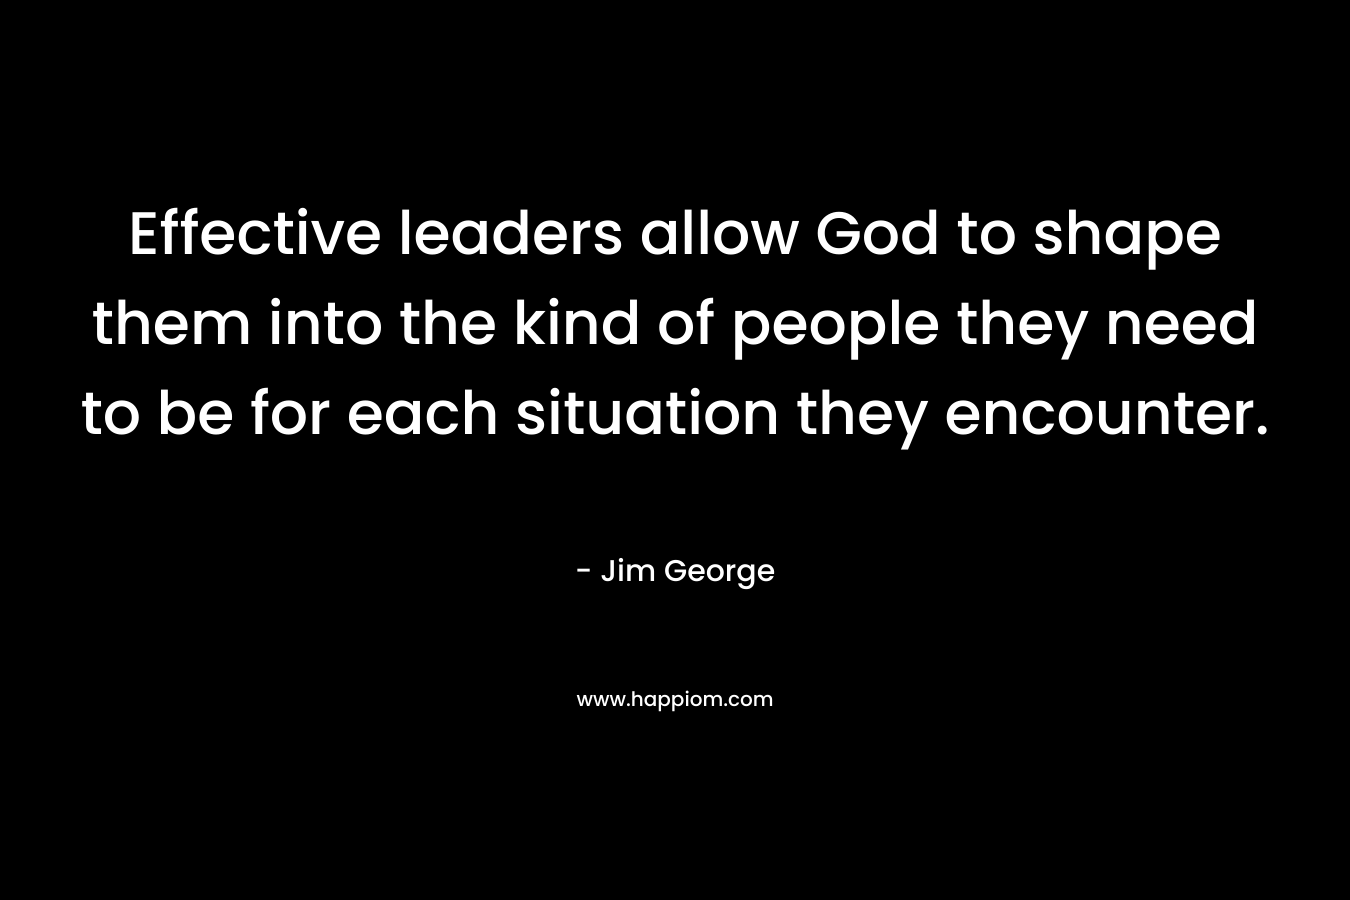 Effective leaders allow God to shape them into the kind of people they need to be for each situation they encounter. – Jim George